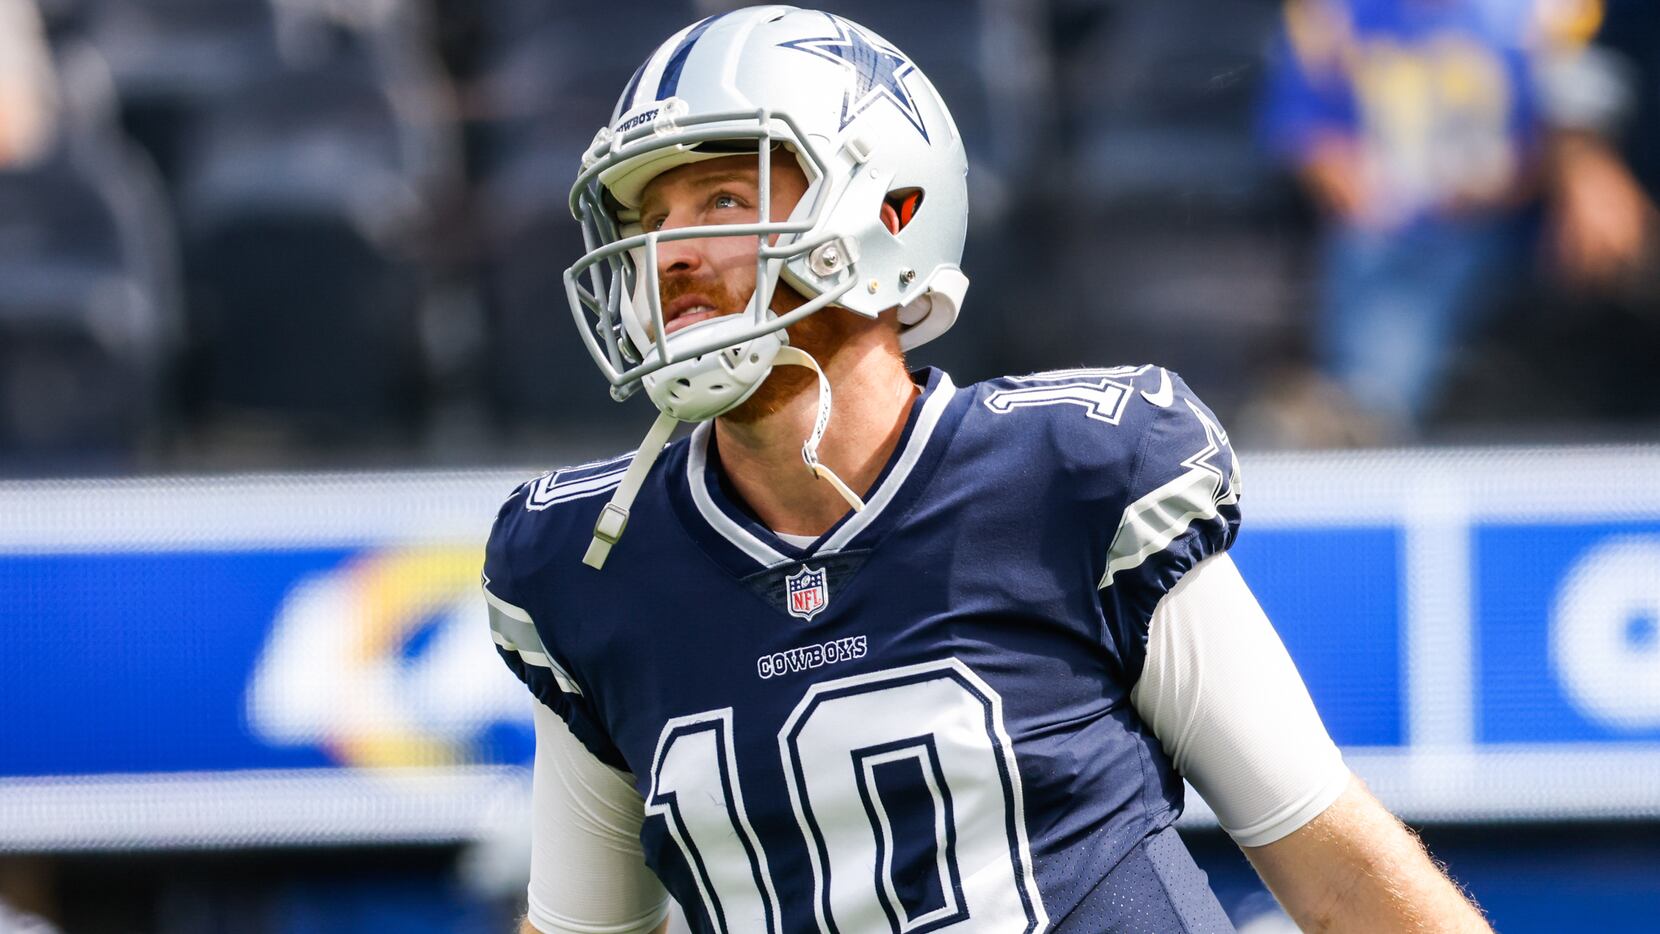 Cooper Rush may be the best choice for the Cowboys as Dak Prescott